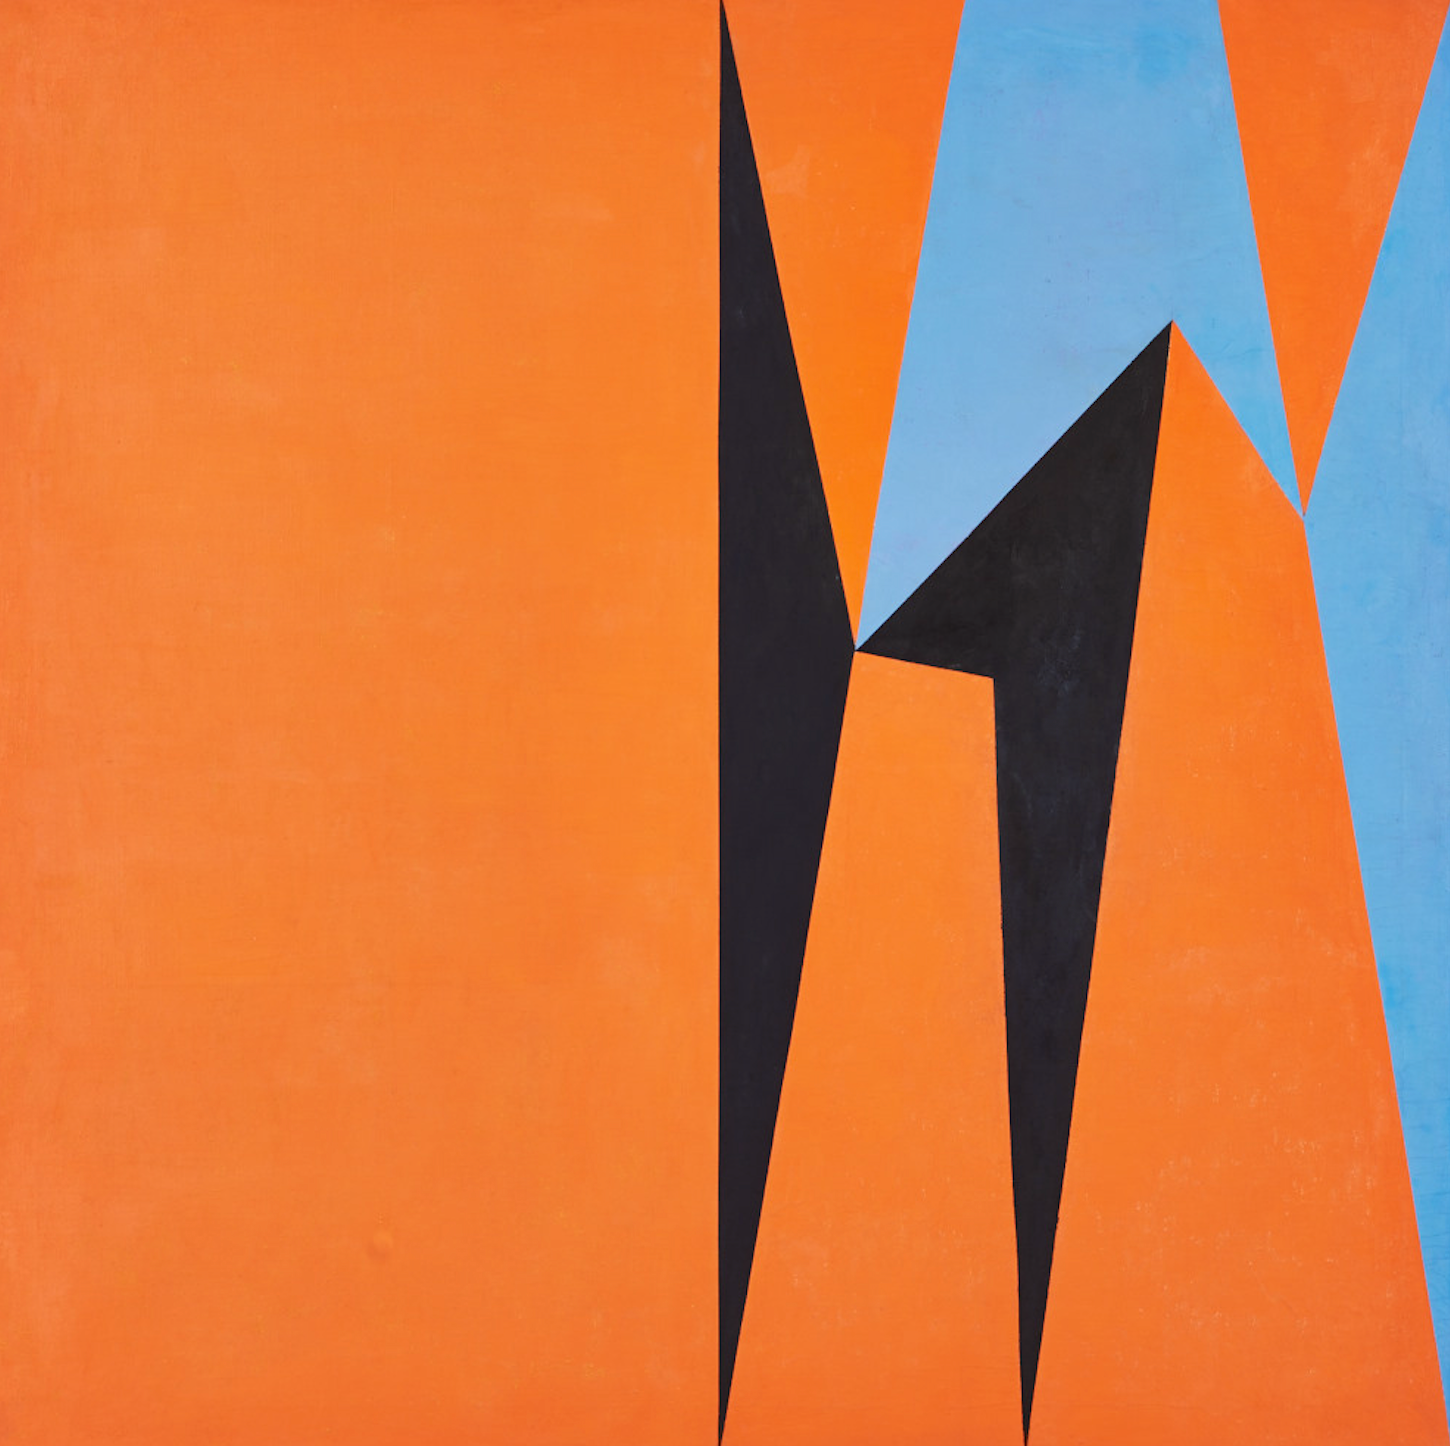 Lorser Feitelson, Dichotomic Organization, 1959, oil on canvas, 61.25” x 61.25” x 1.5”, Gift of the Maria Eccles Caine Foundation